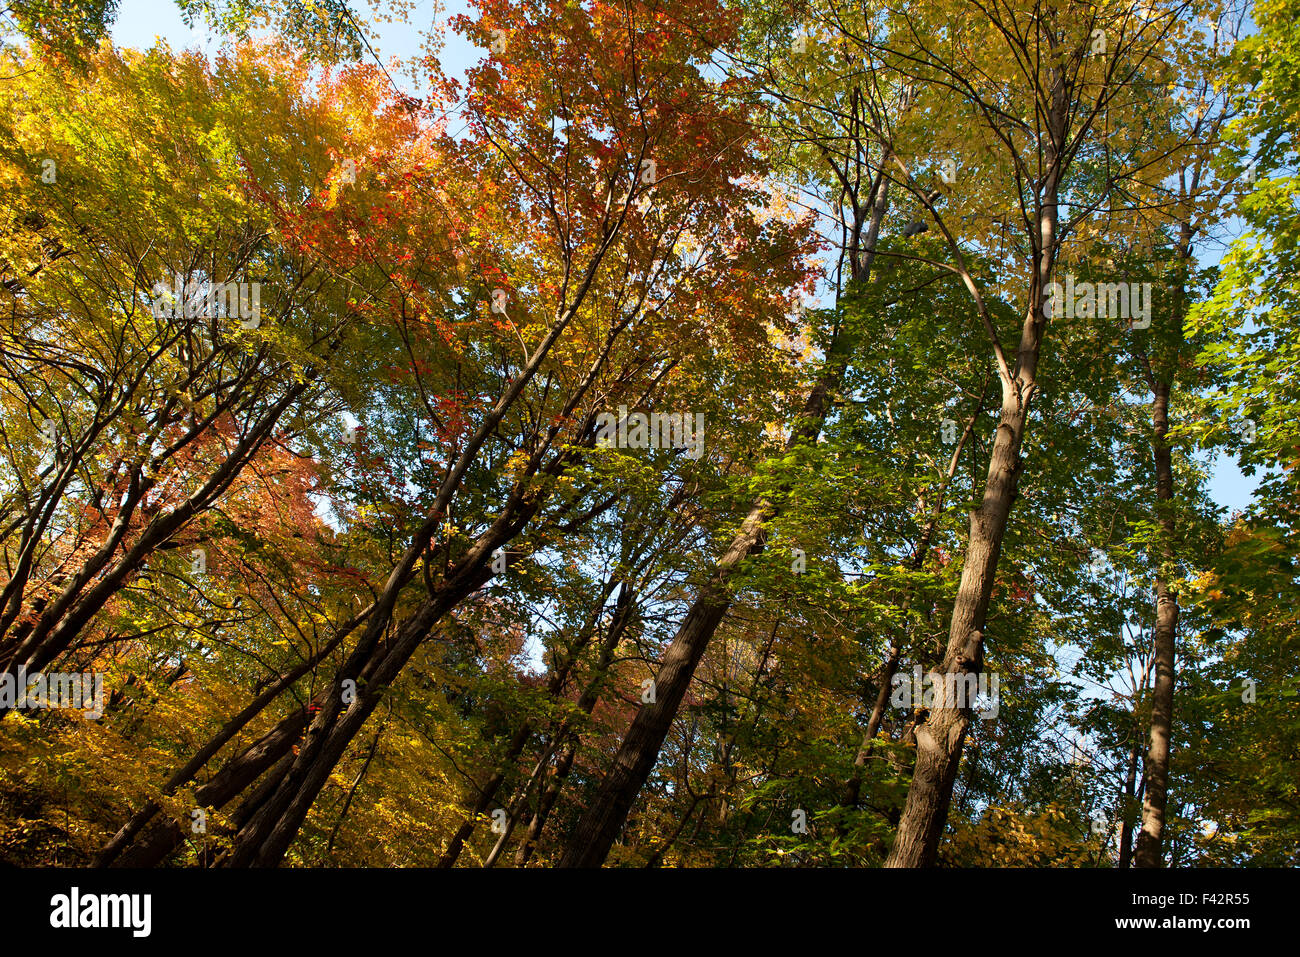 Trees in autumn, low angle view Stock Photo